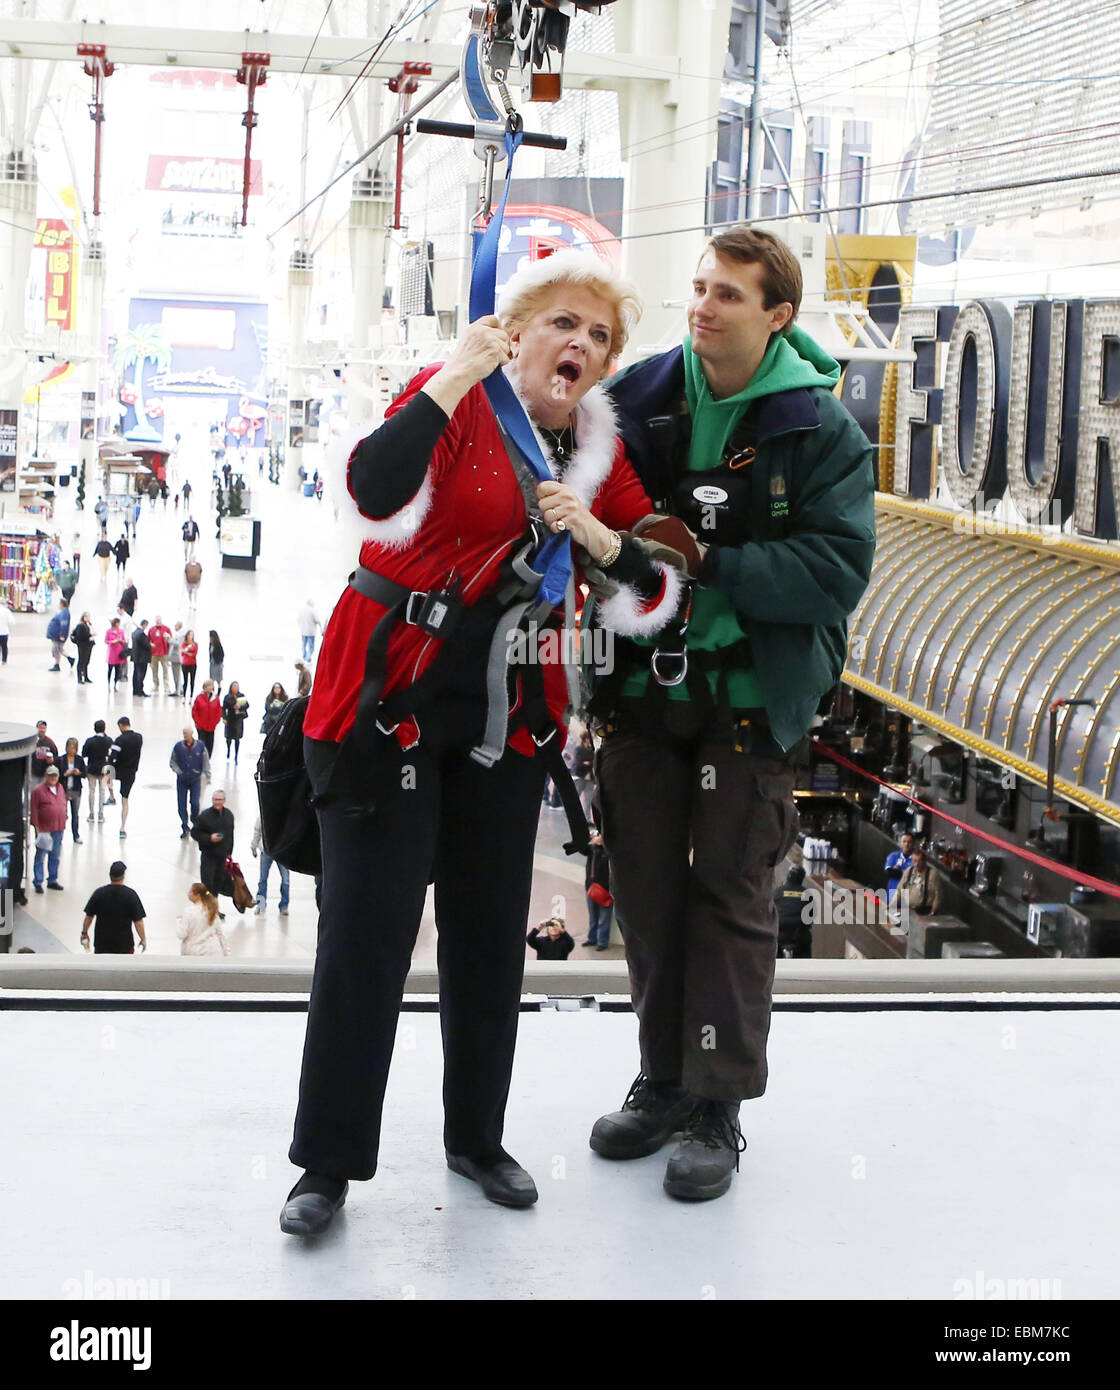 Las Vegas, NV, USA. 2nd Dec, 2014. Mayor of Las Vegas CAROLYN GOODMAN, left, reacts after dashing down the larger-than-life SlotZilla zipline with entertainment personality ROBIN LEACH, not photographed, on Tuesday, Dec. 2, 2014 in Las Vegas. LEACH and GOODMAN challenged each other to ride SlotZilla in return for a $5,000 each donation to Las Vegas charity event, the Great Santa Run, taking place Saturday, December 6. Credit:  Bizuayehu Tesfaye/ZUMA Wire/ZUMAPRESS.com/Alamy Live News Stock Photo